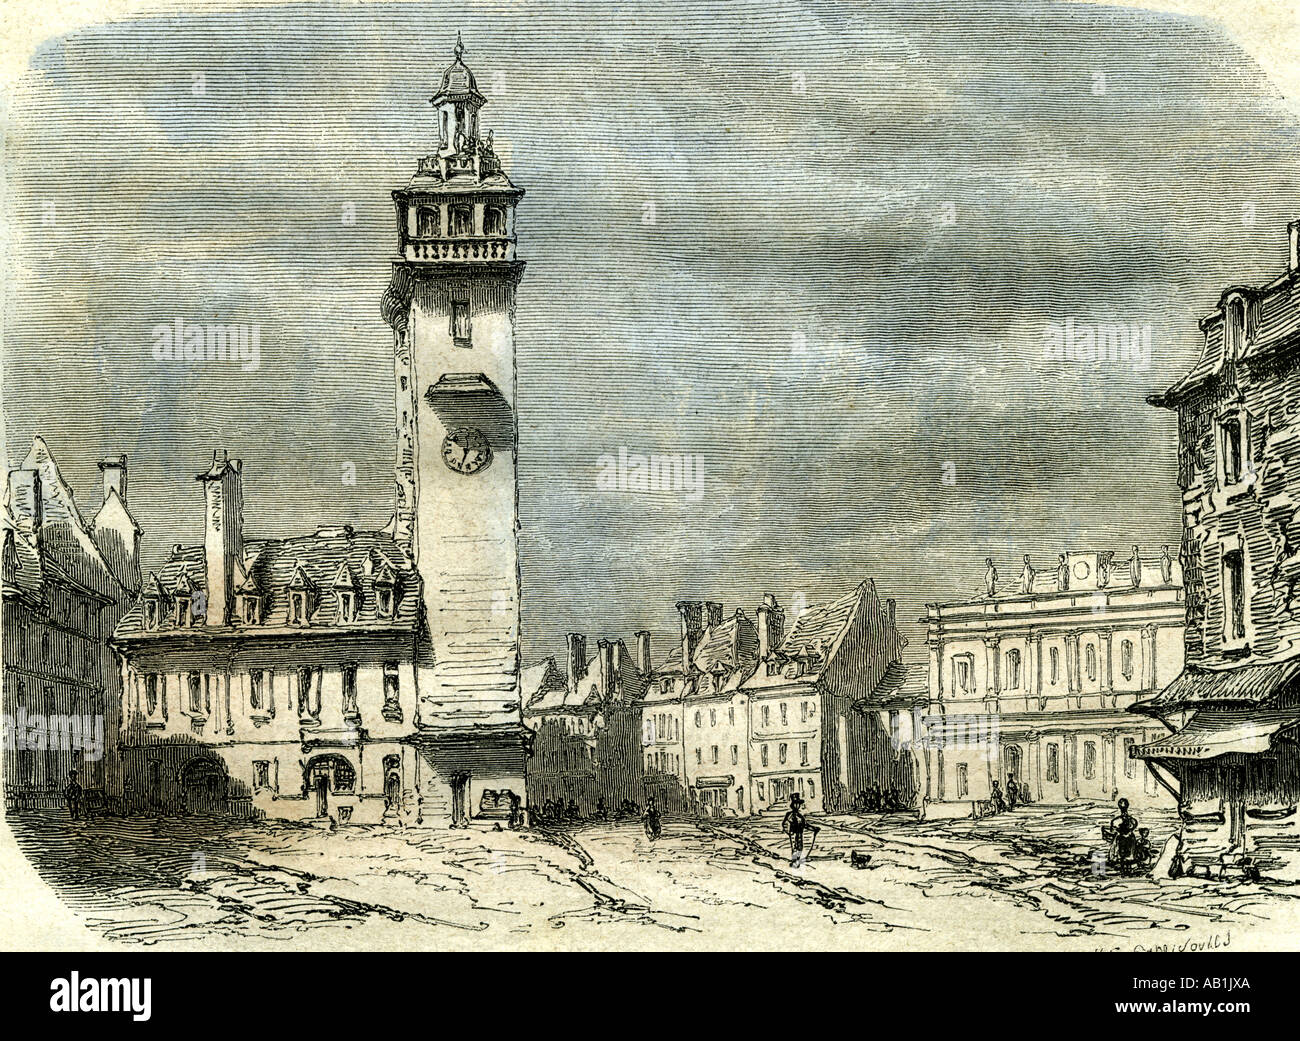 Moulins France 19th century Stock Photo